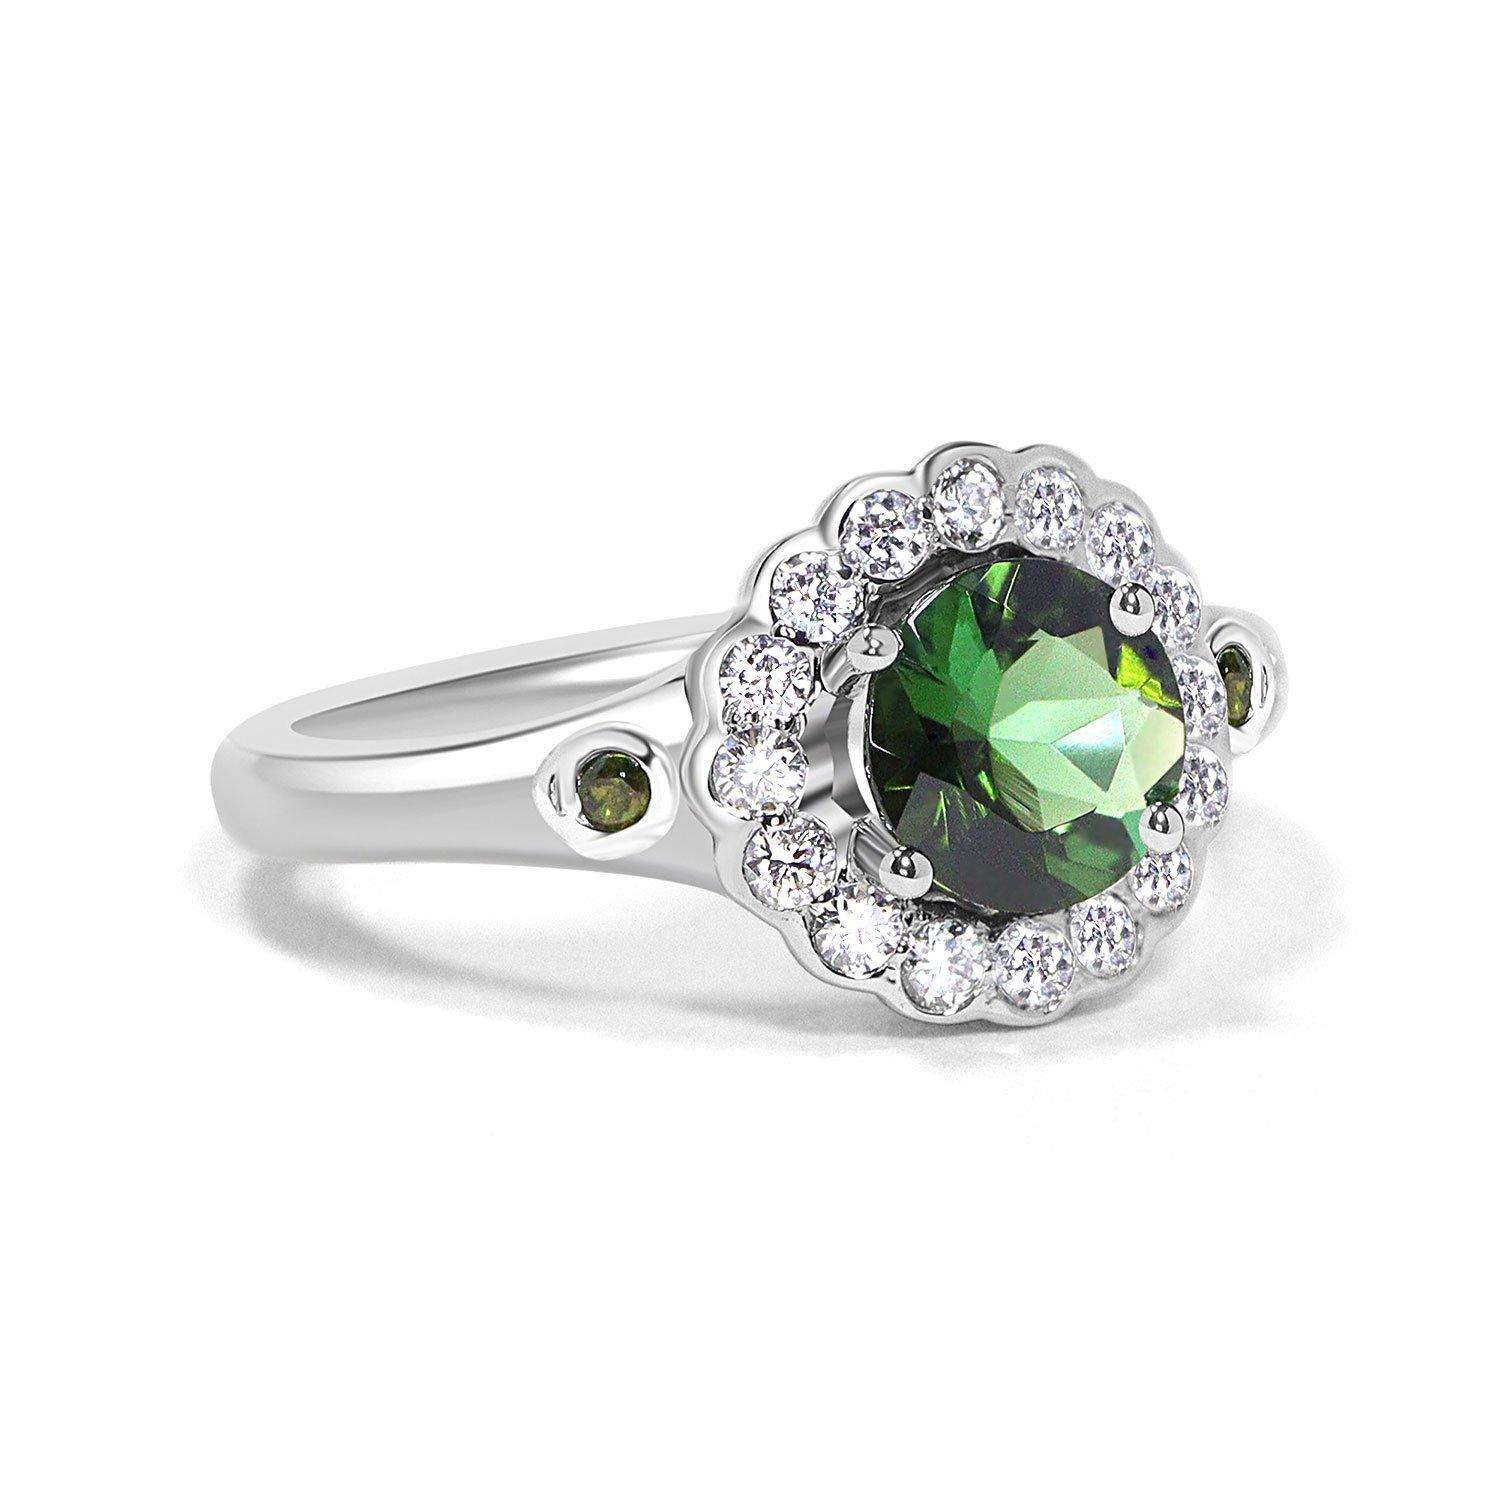 For Sale:  10k White Gold 1ct Natural Green Tourmaline & Diamond '.28t.c.w' Halo Ring 2